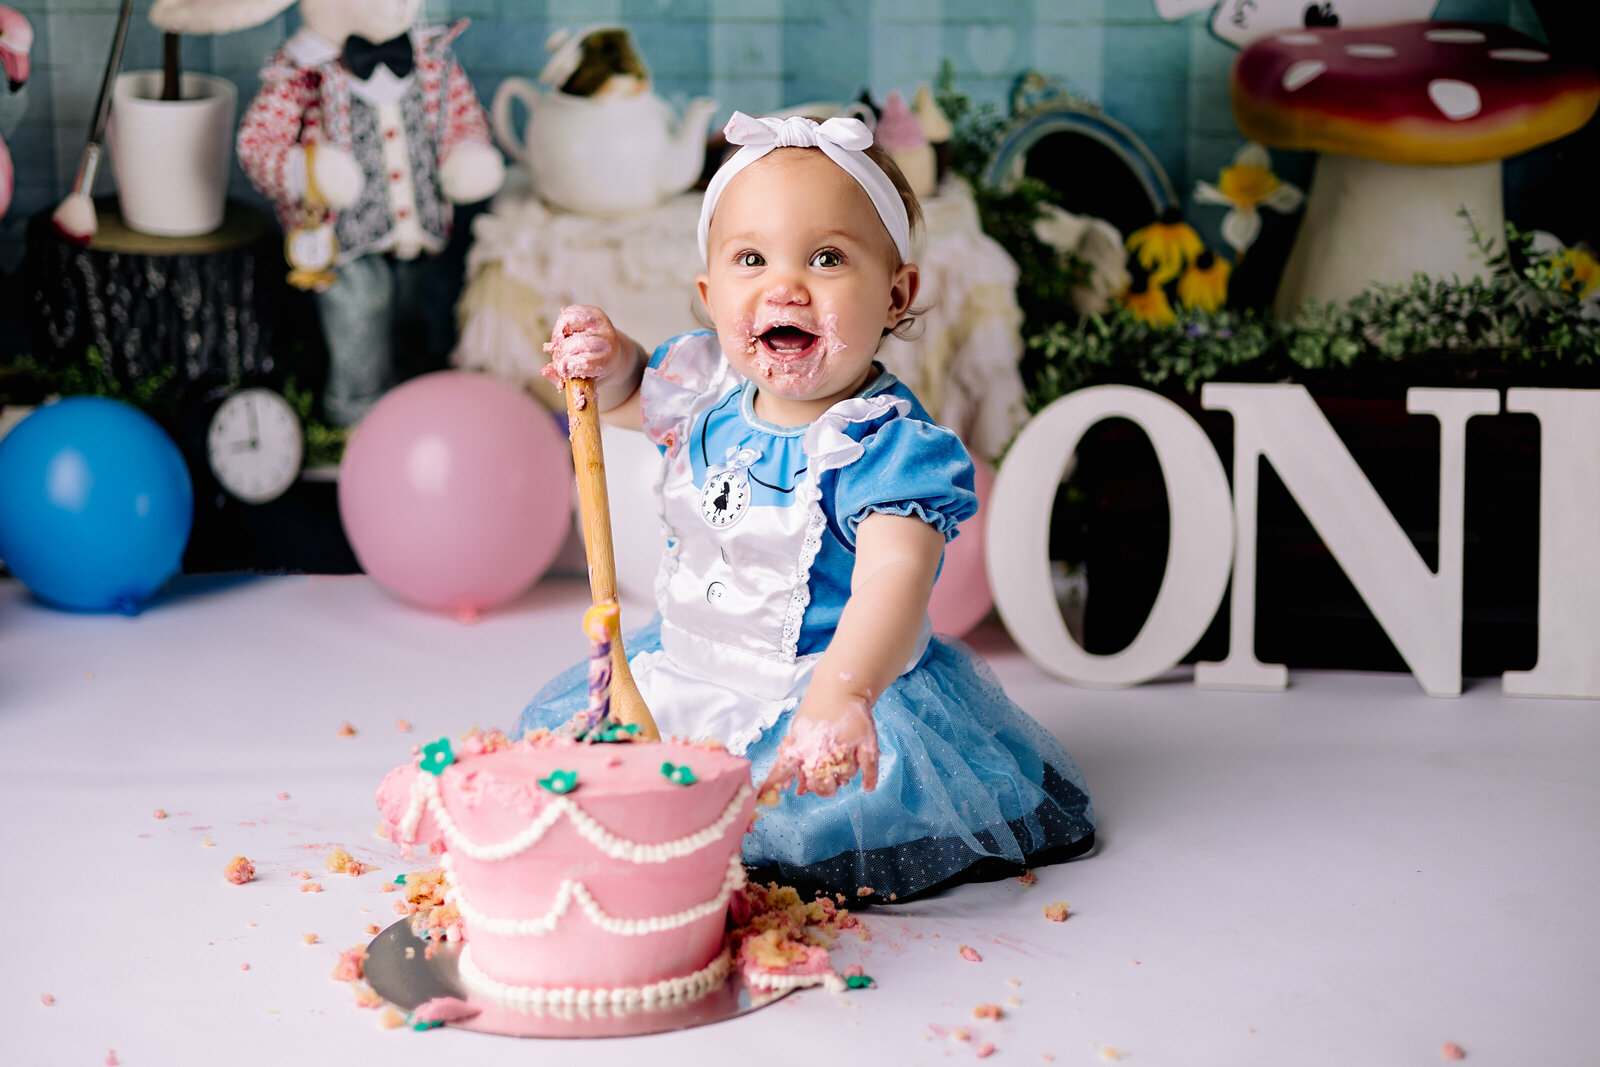 Baby girl joyfully digs  in to her birthday cake with a large wooden spoon